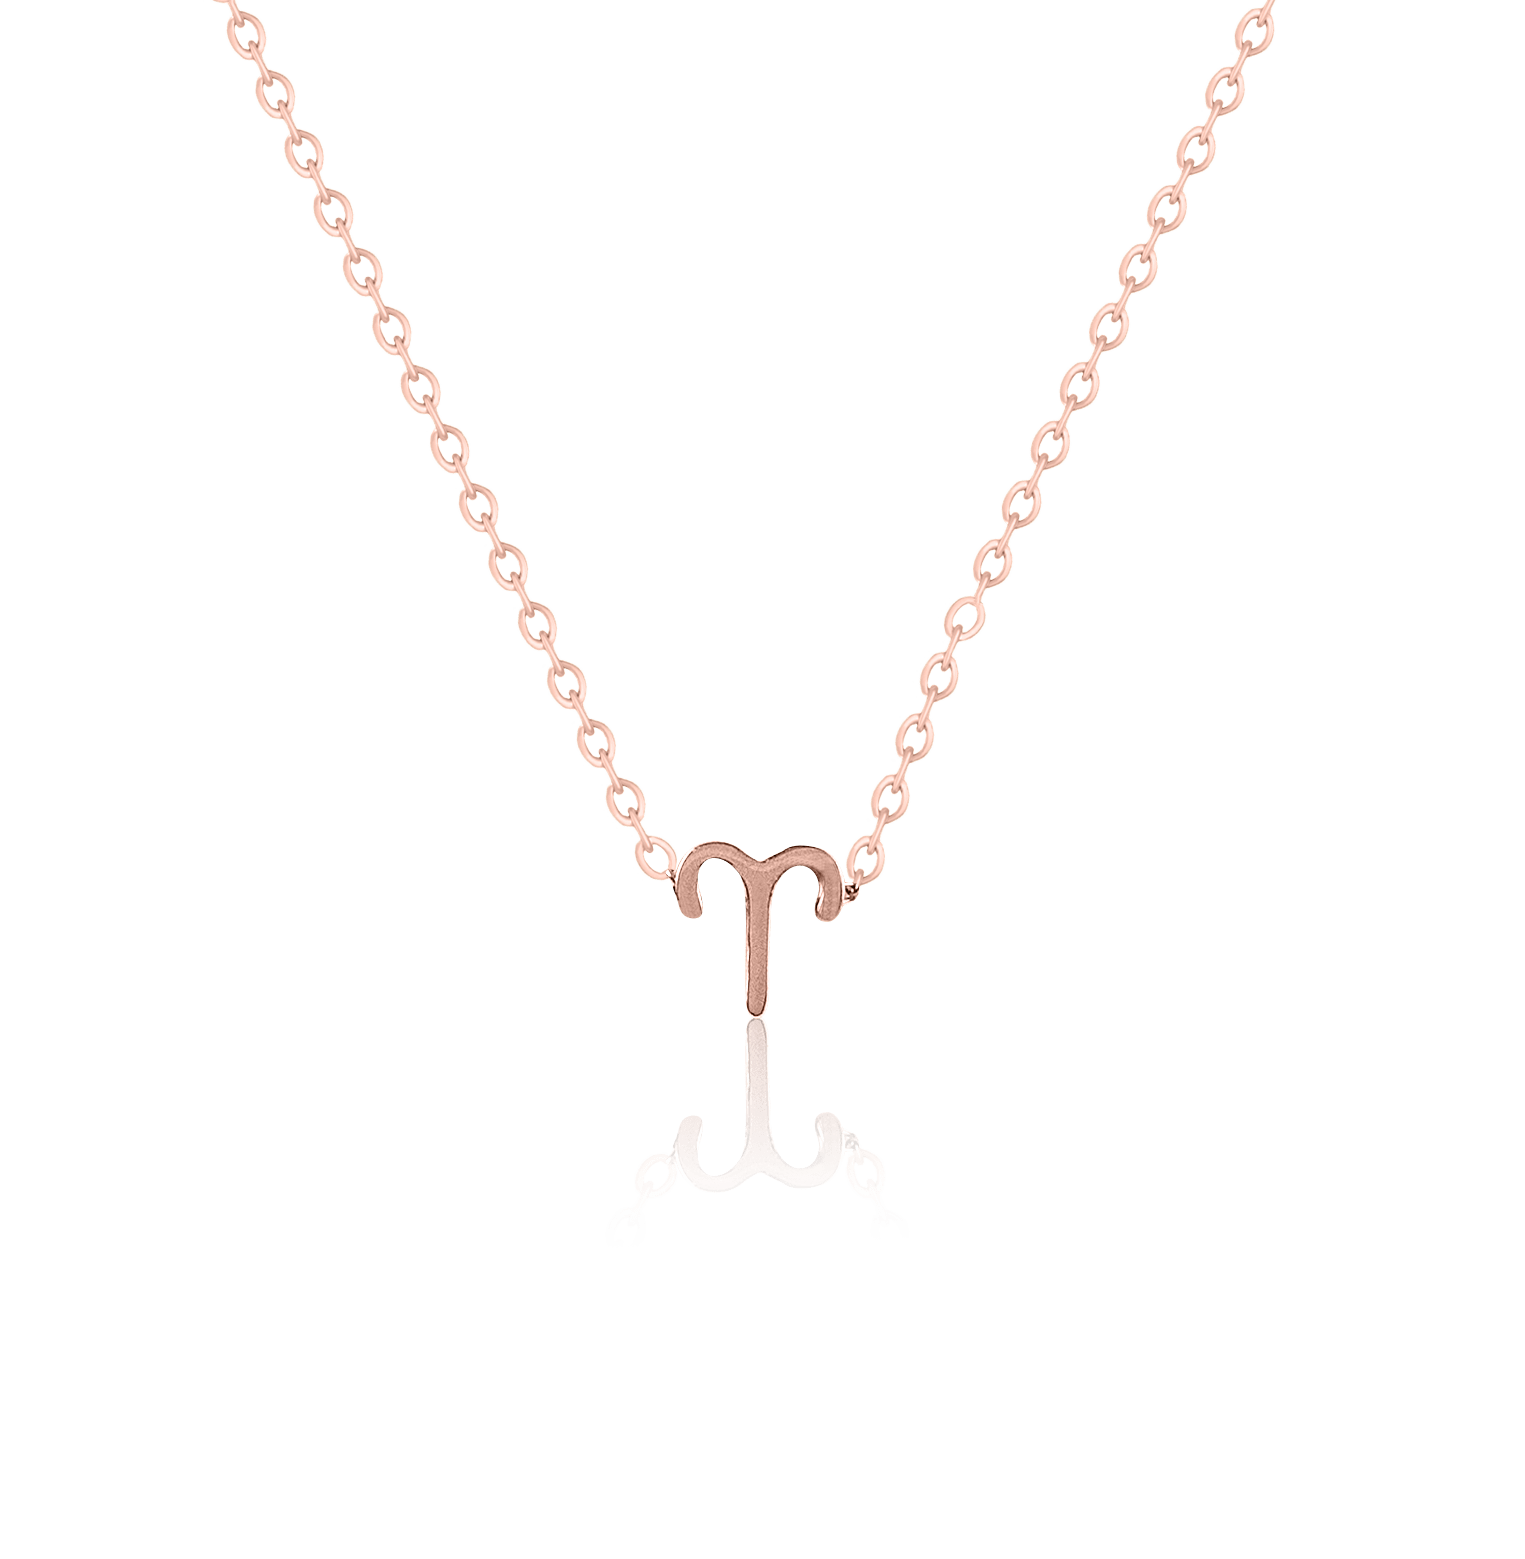 bianco rosso Necklaces Rose Gold Aries - Necklace cyprus greece jewelry gift free shipping europe worldwide